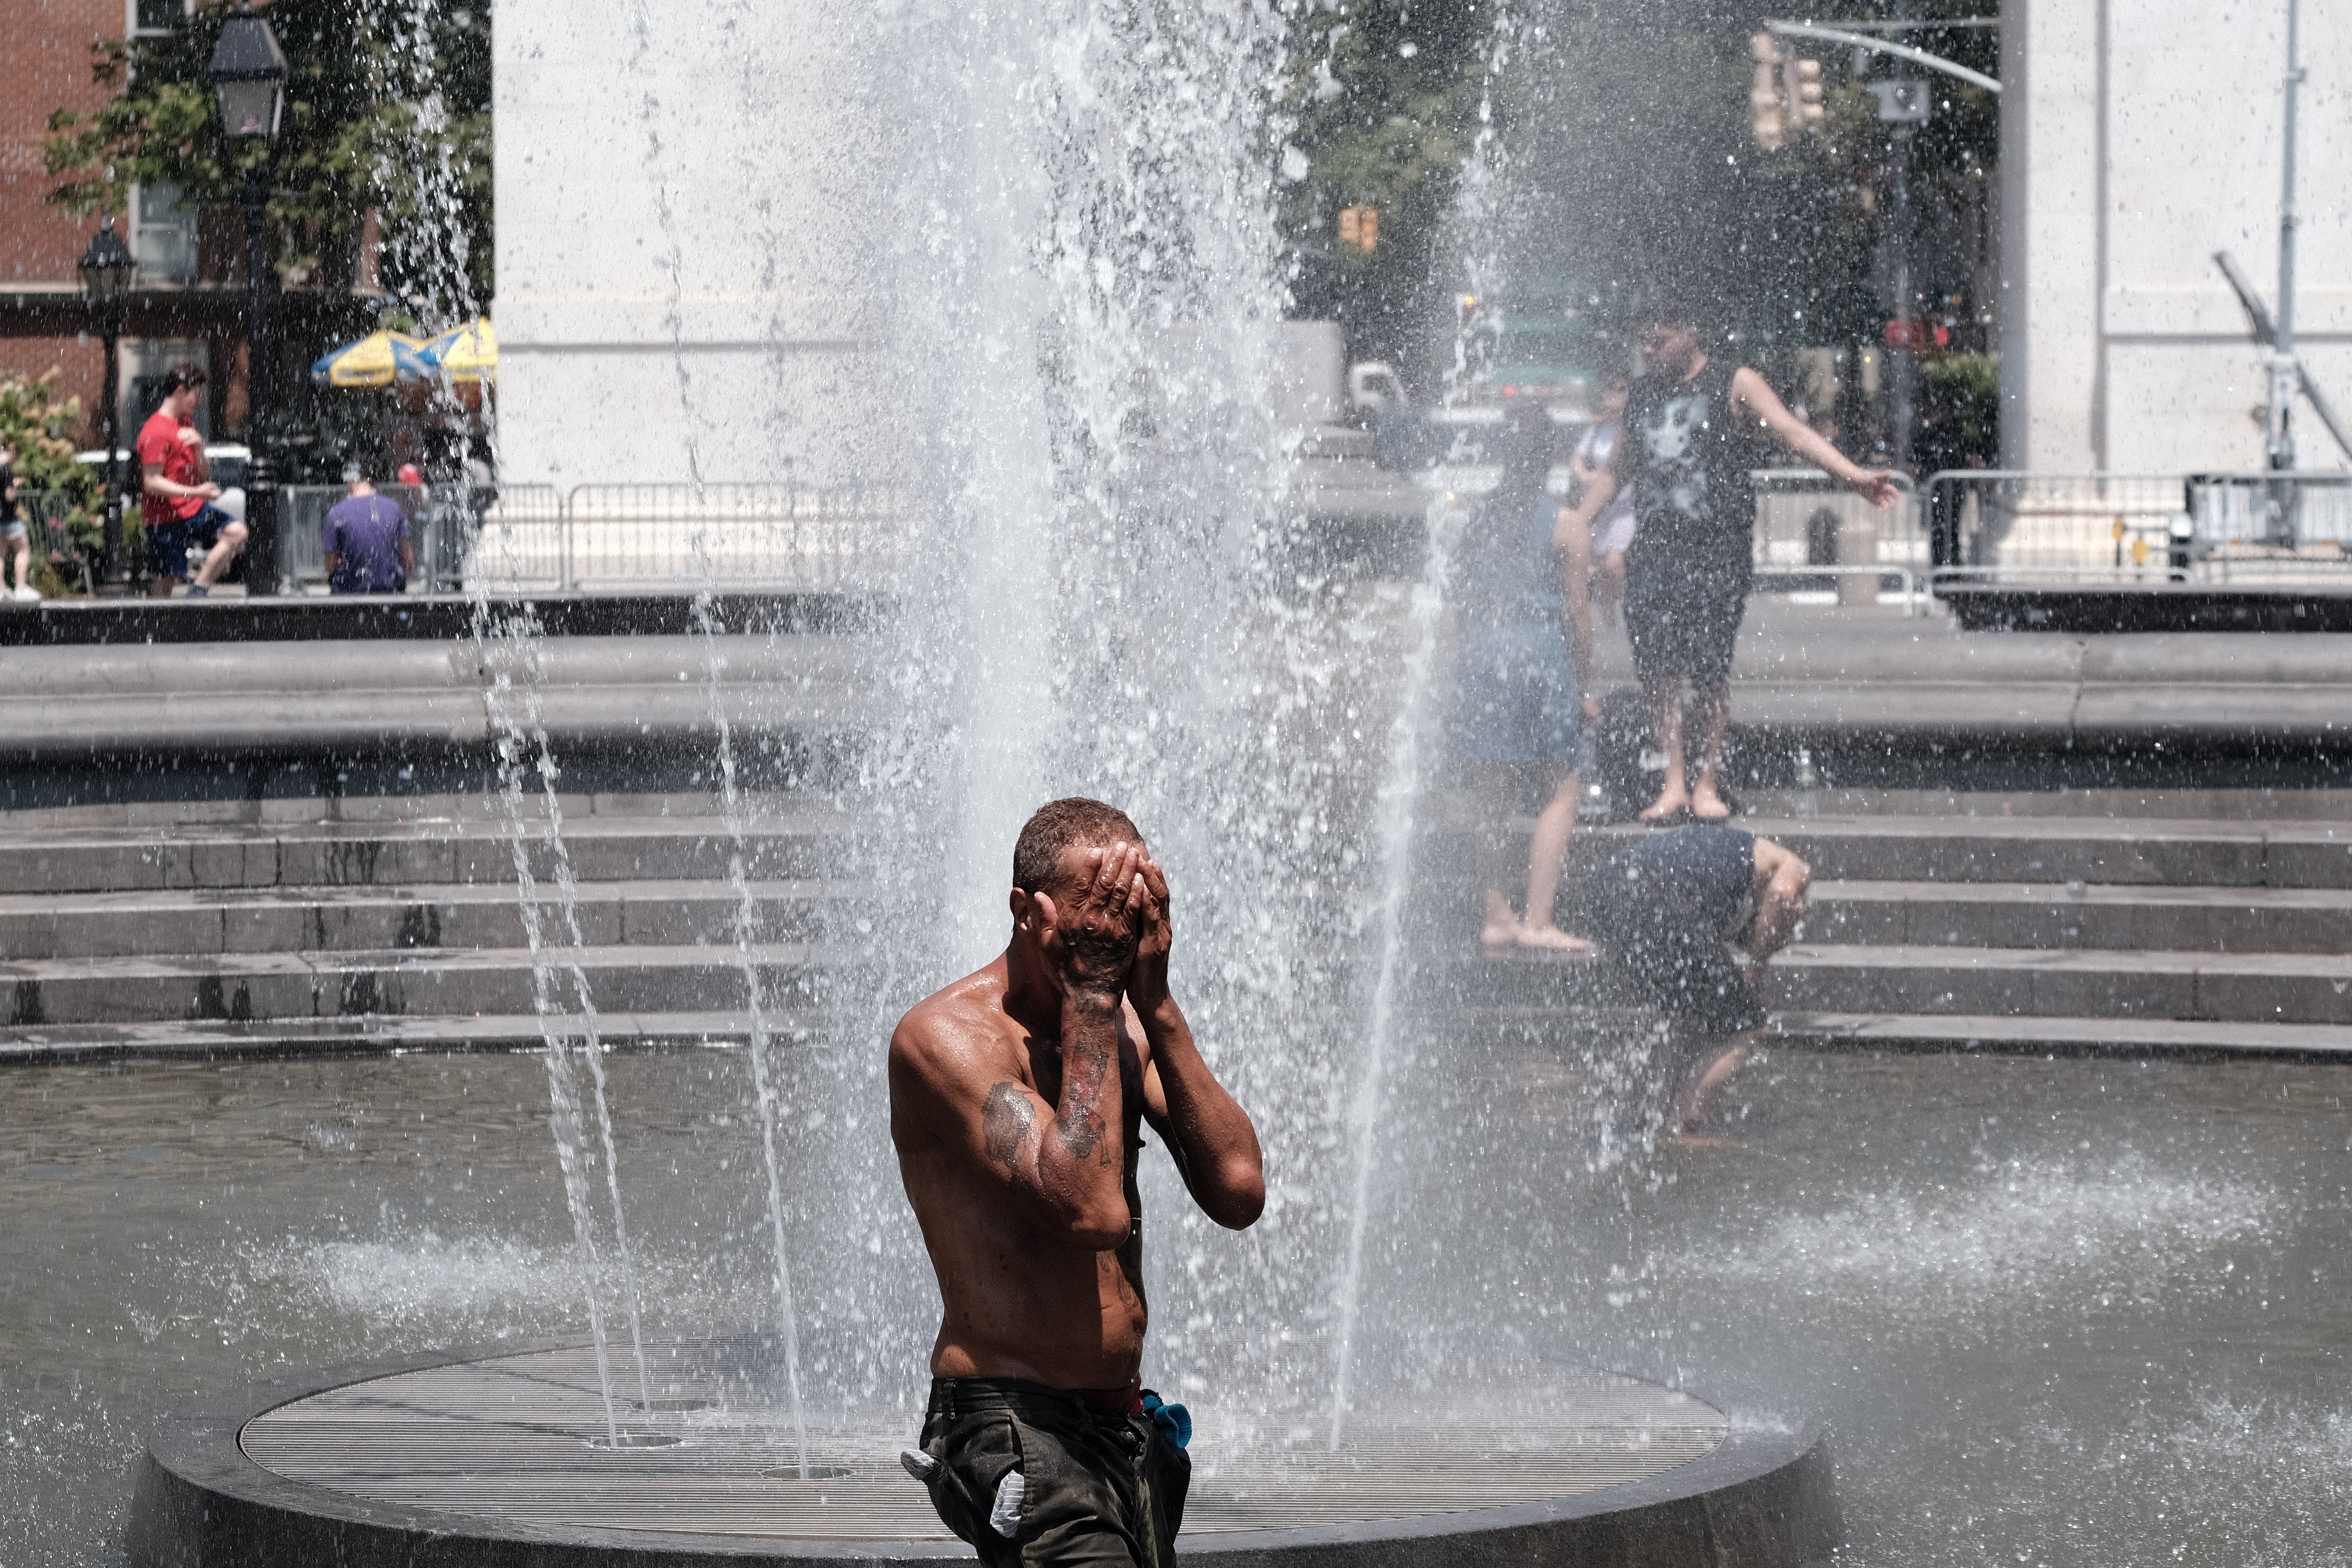 New Yorkers cool off in Washington Square Park on 30 June as temperatures approach 100 degrees Fahrenheit during a bicoastal heat wave.